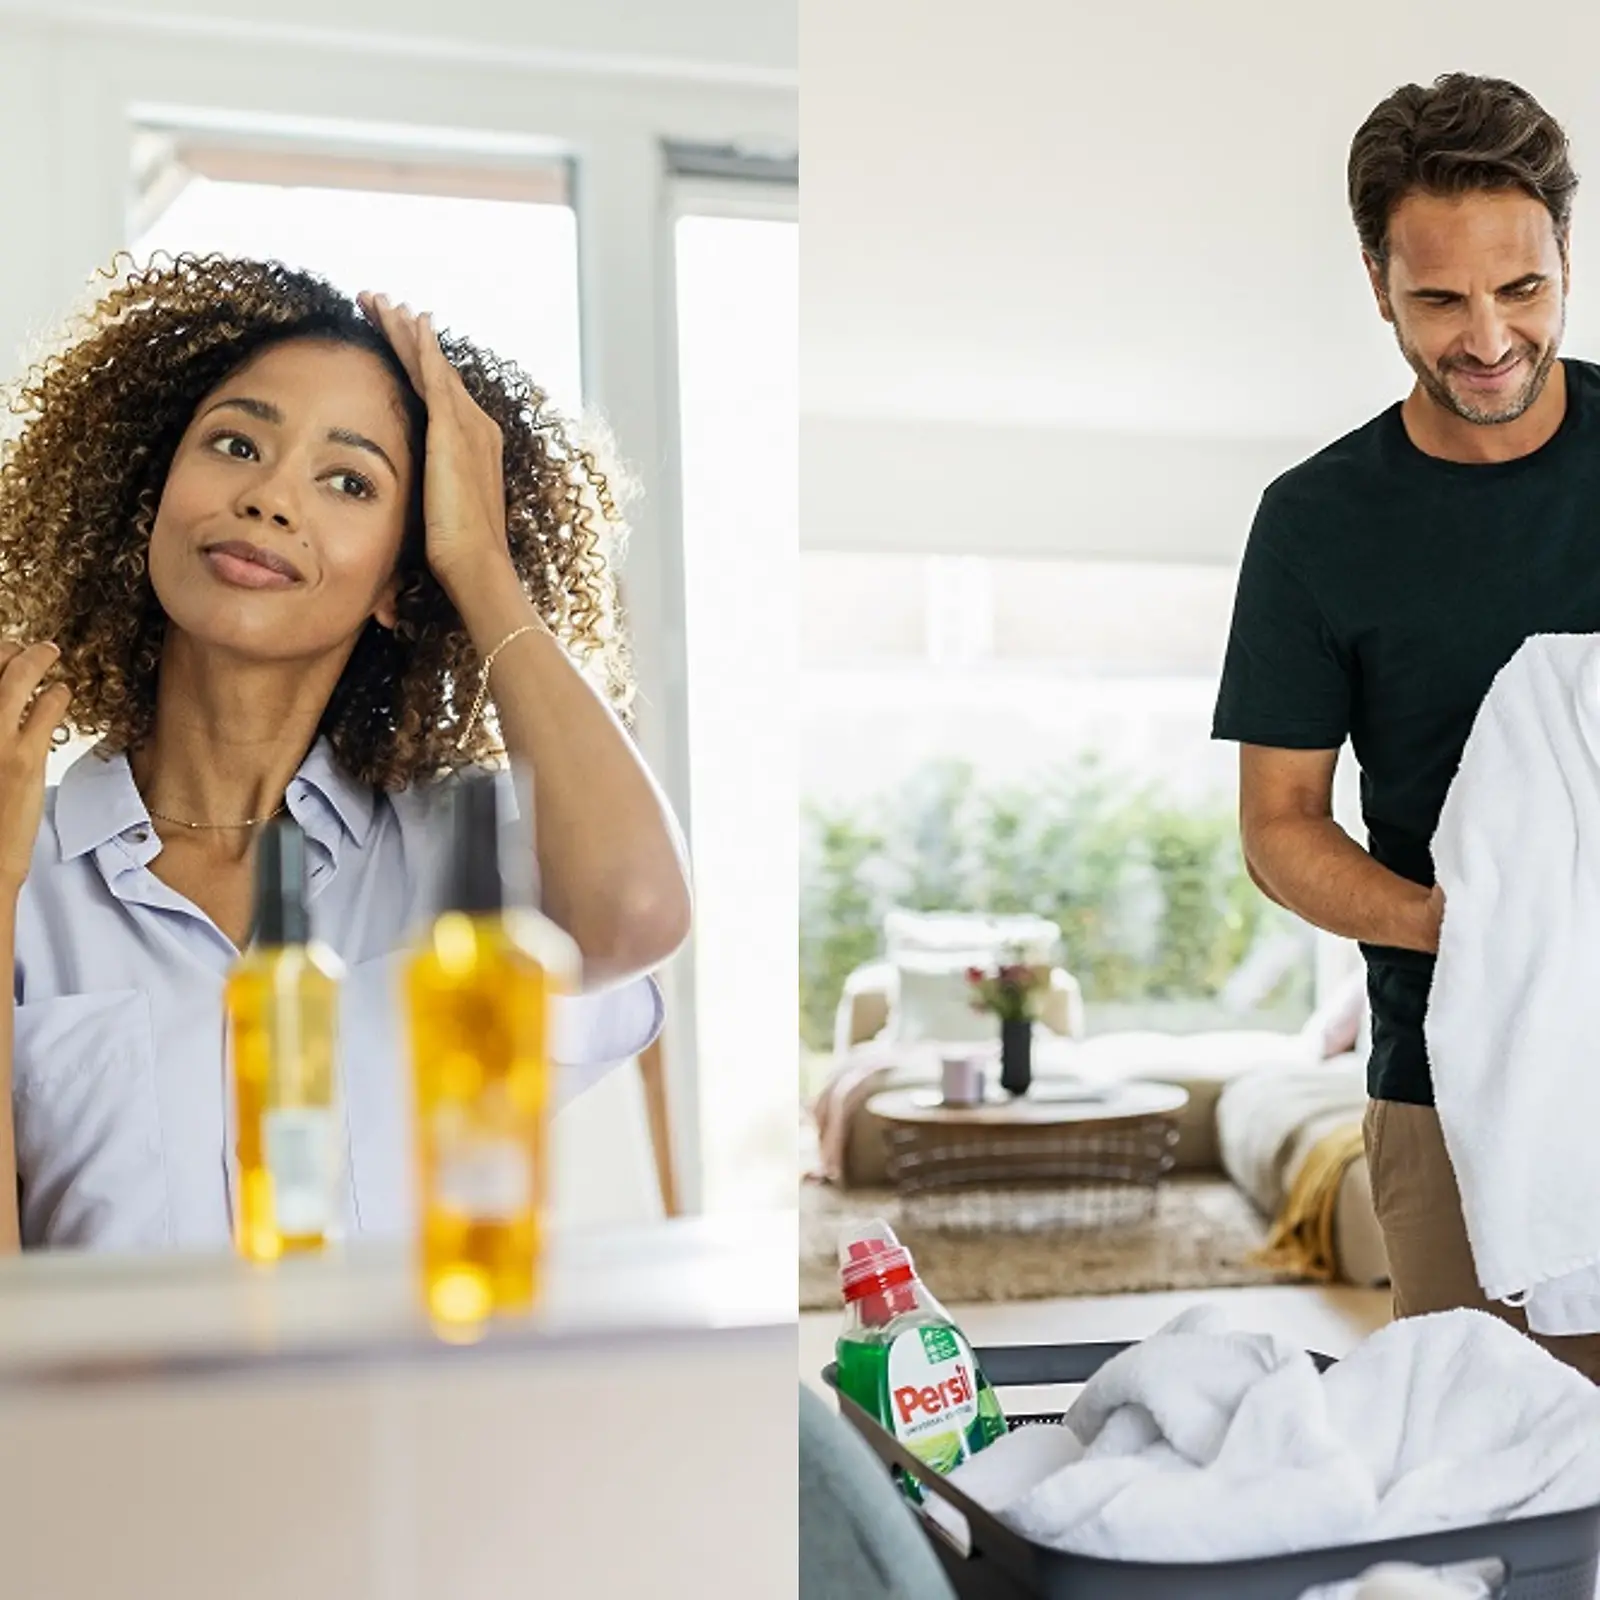 On left hand side: women applying a hair care product to her curly hair, on right hand side a man folding the laundry